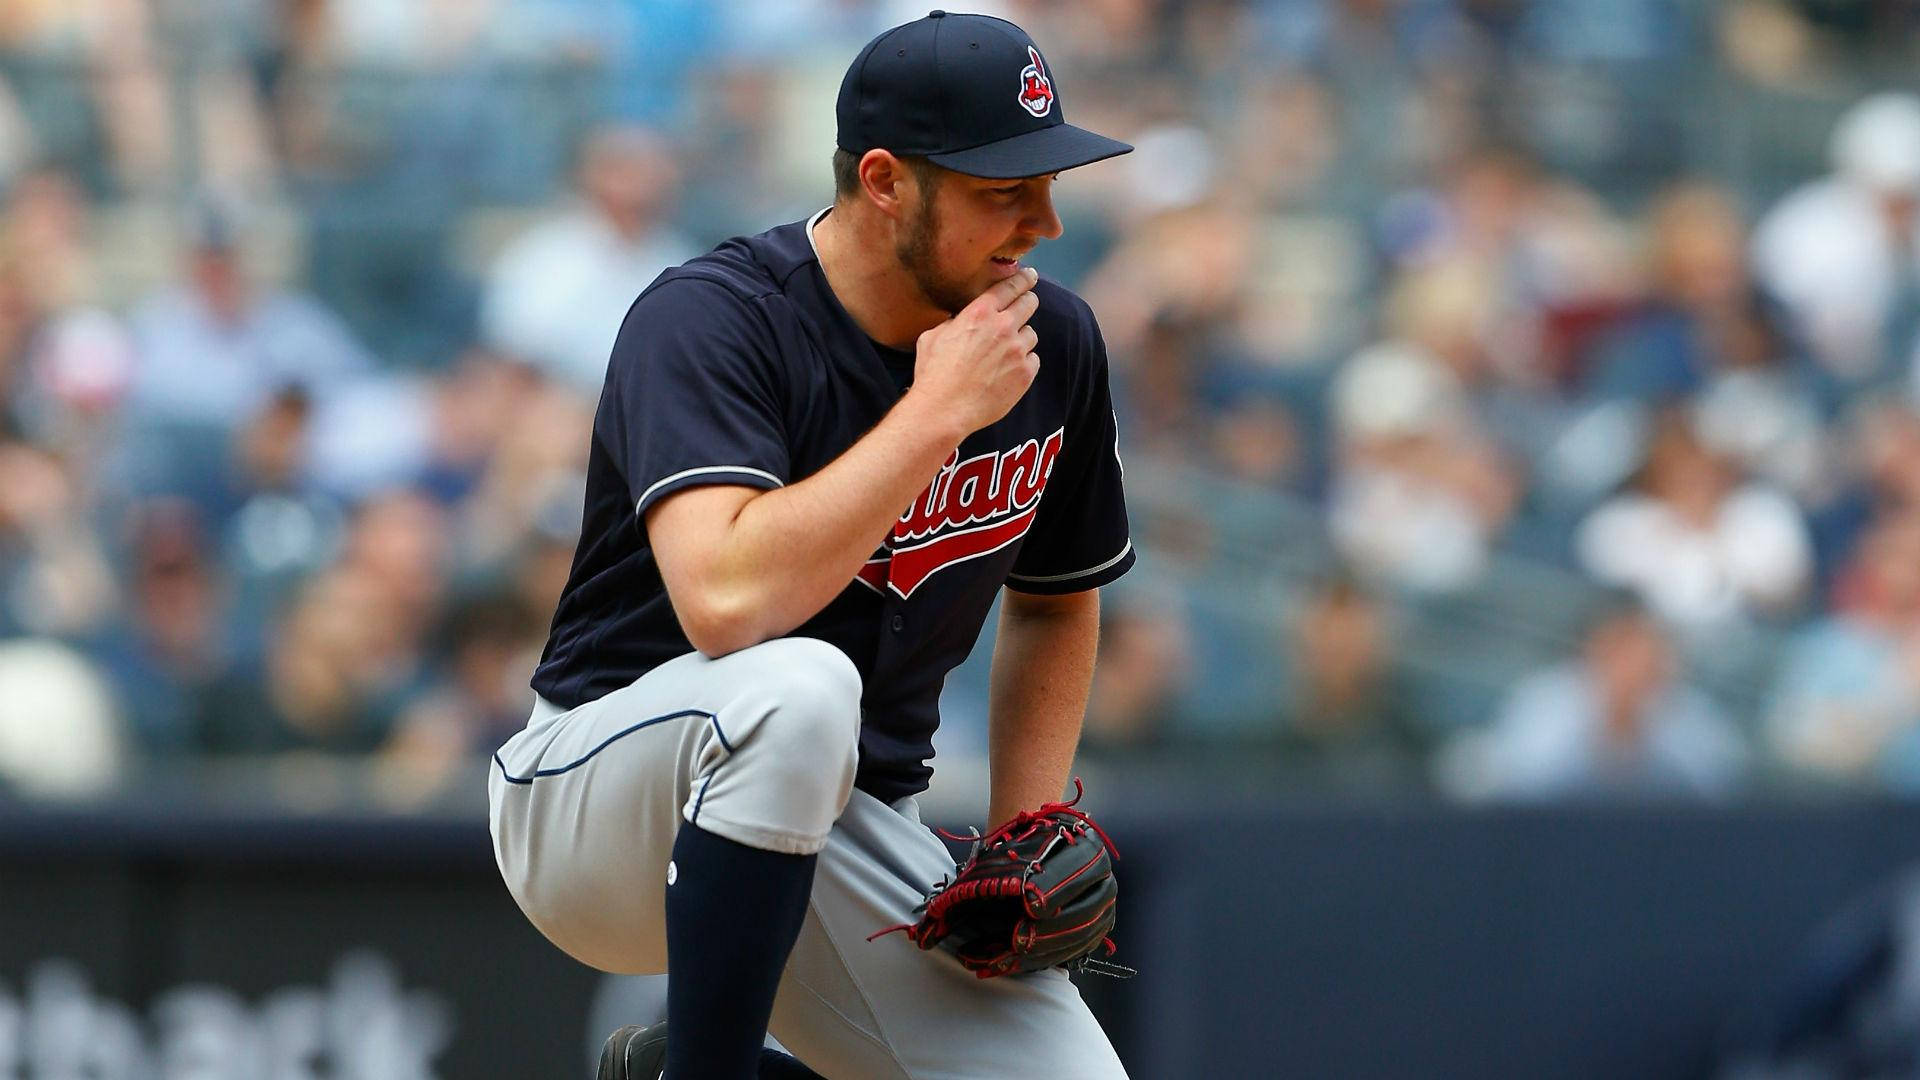 Trevor Bauer Crouching During A Game Background